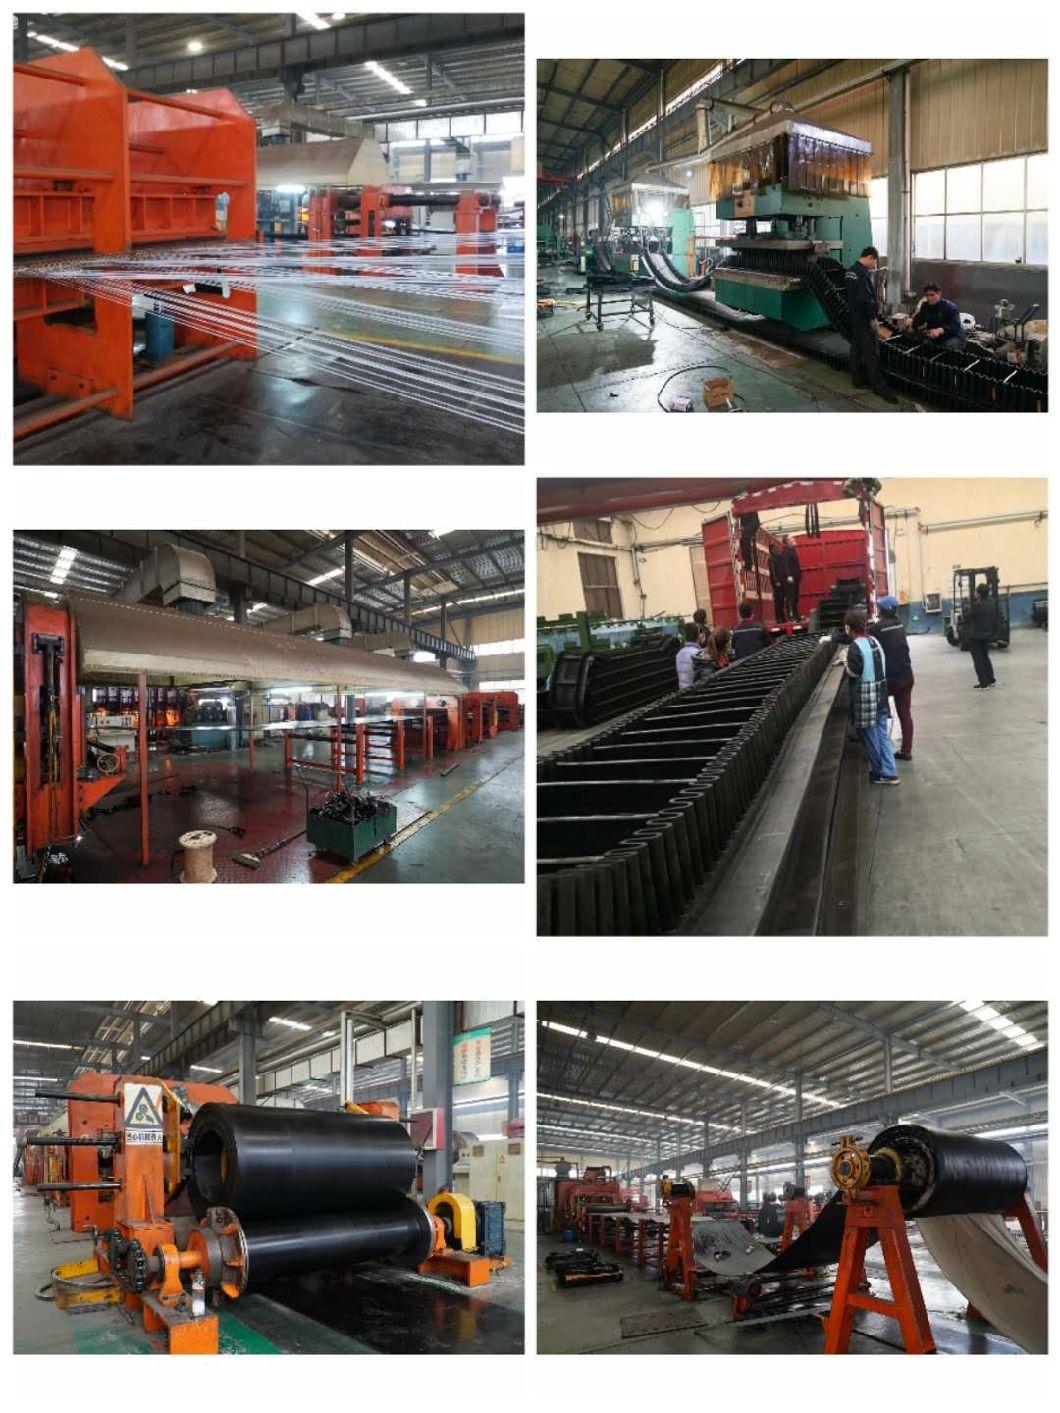 Heat Fire Abrassion Resistant Fabric Transport Ep300 Rubber Conveyor Belt for Heavy Rock